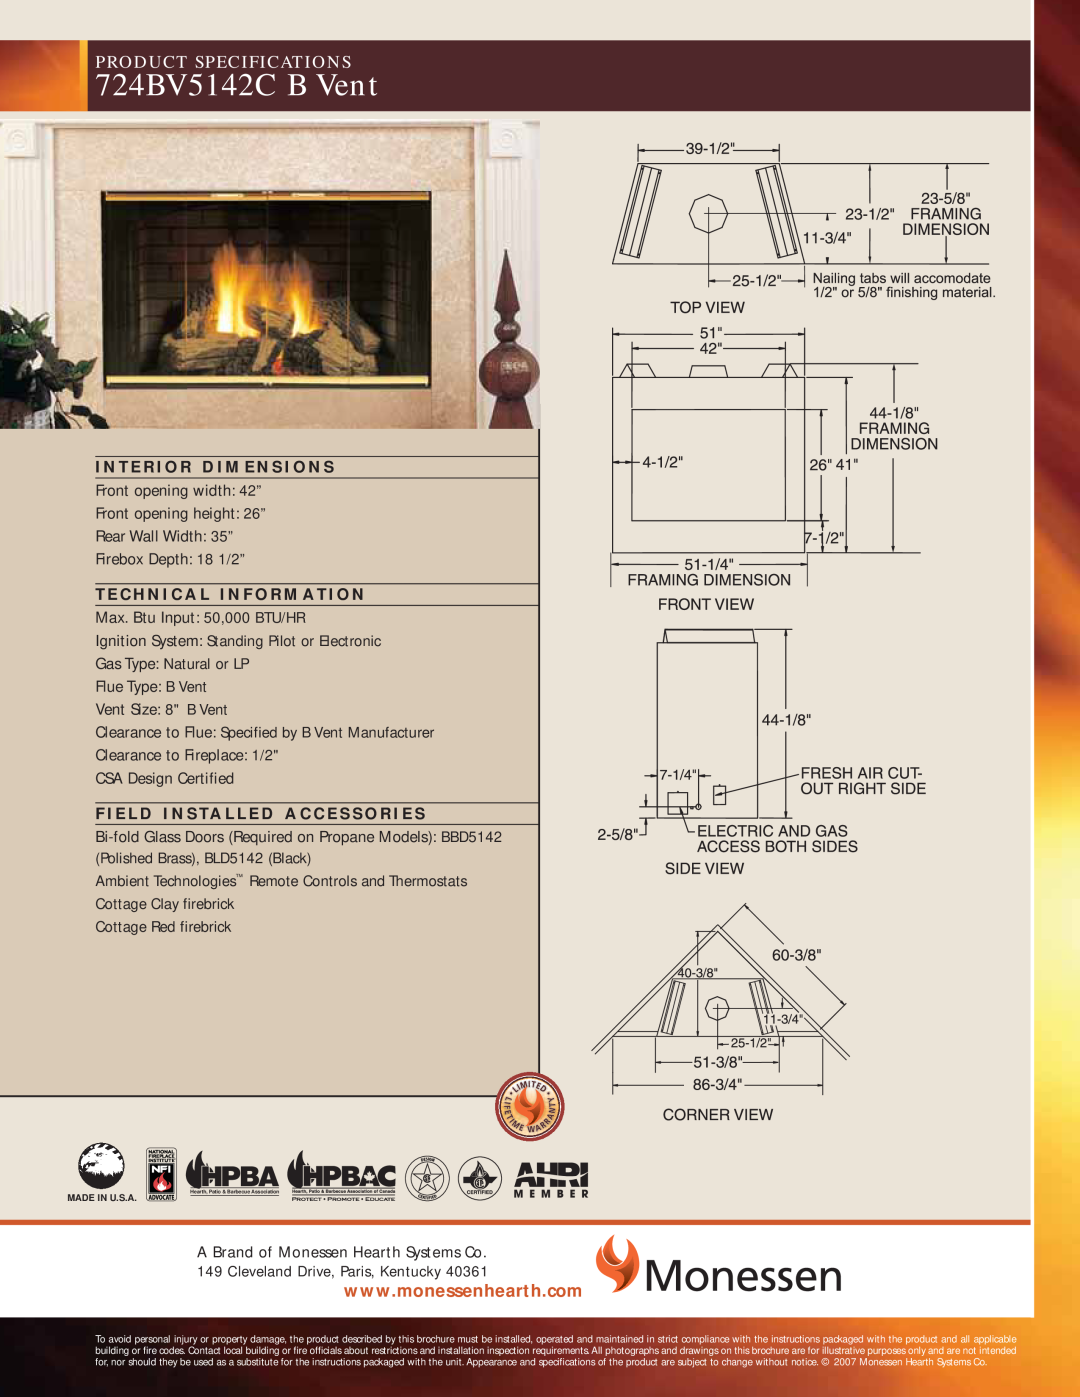 Monessen Hearth specifications 724BV5142C B Vent, Product Specifications 